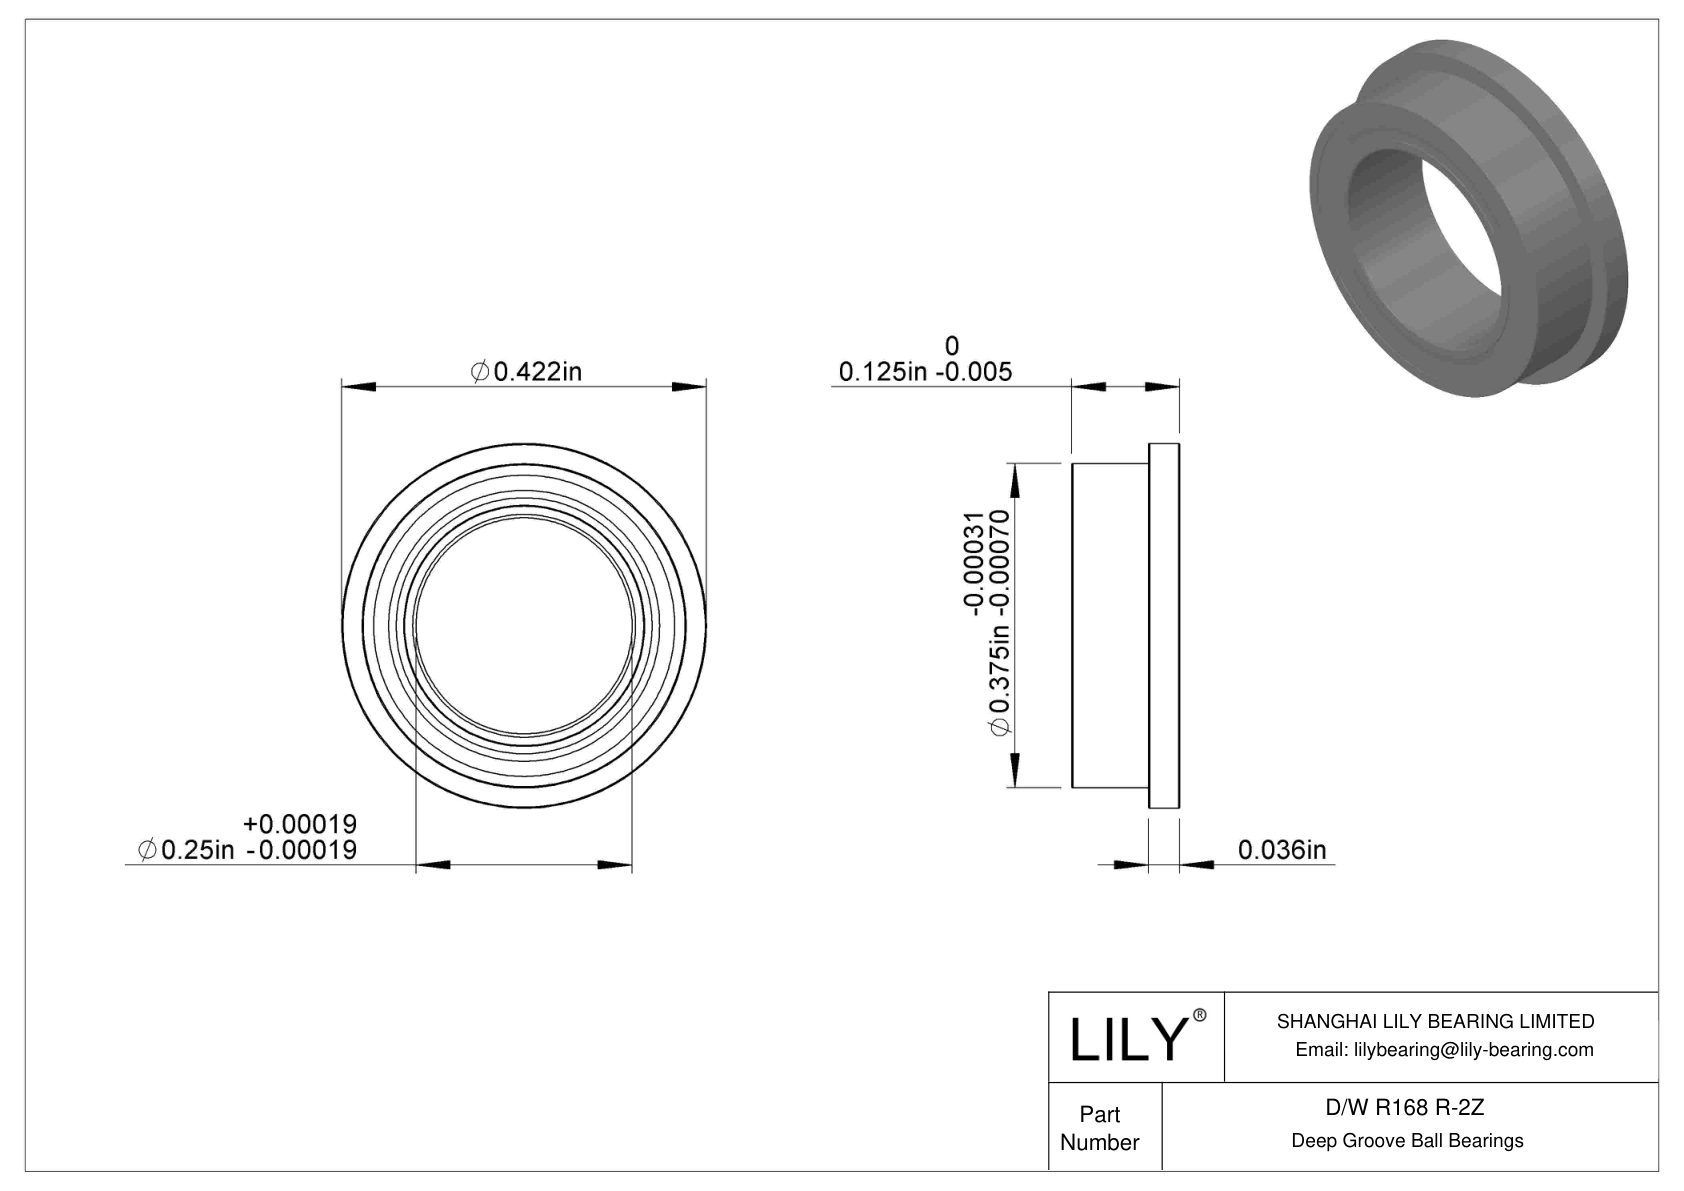 D/W R168 R-2Z Flanged Ball Bearings cad drawing